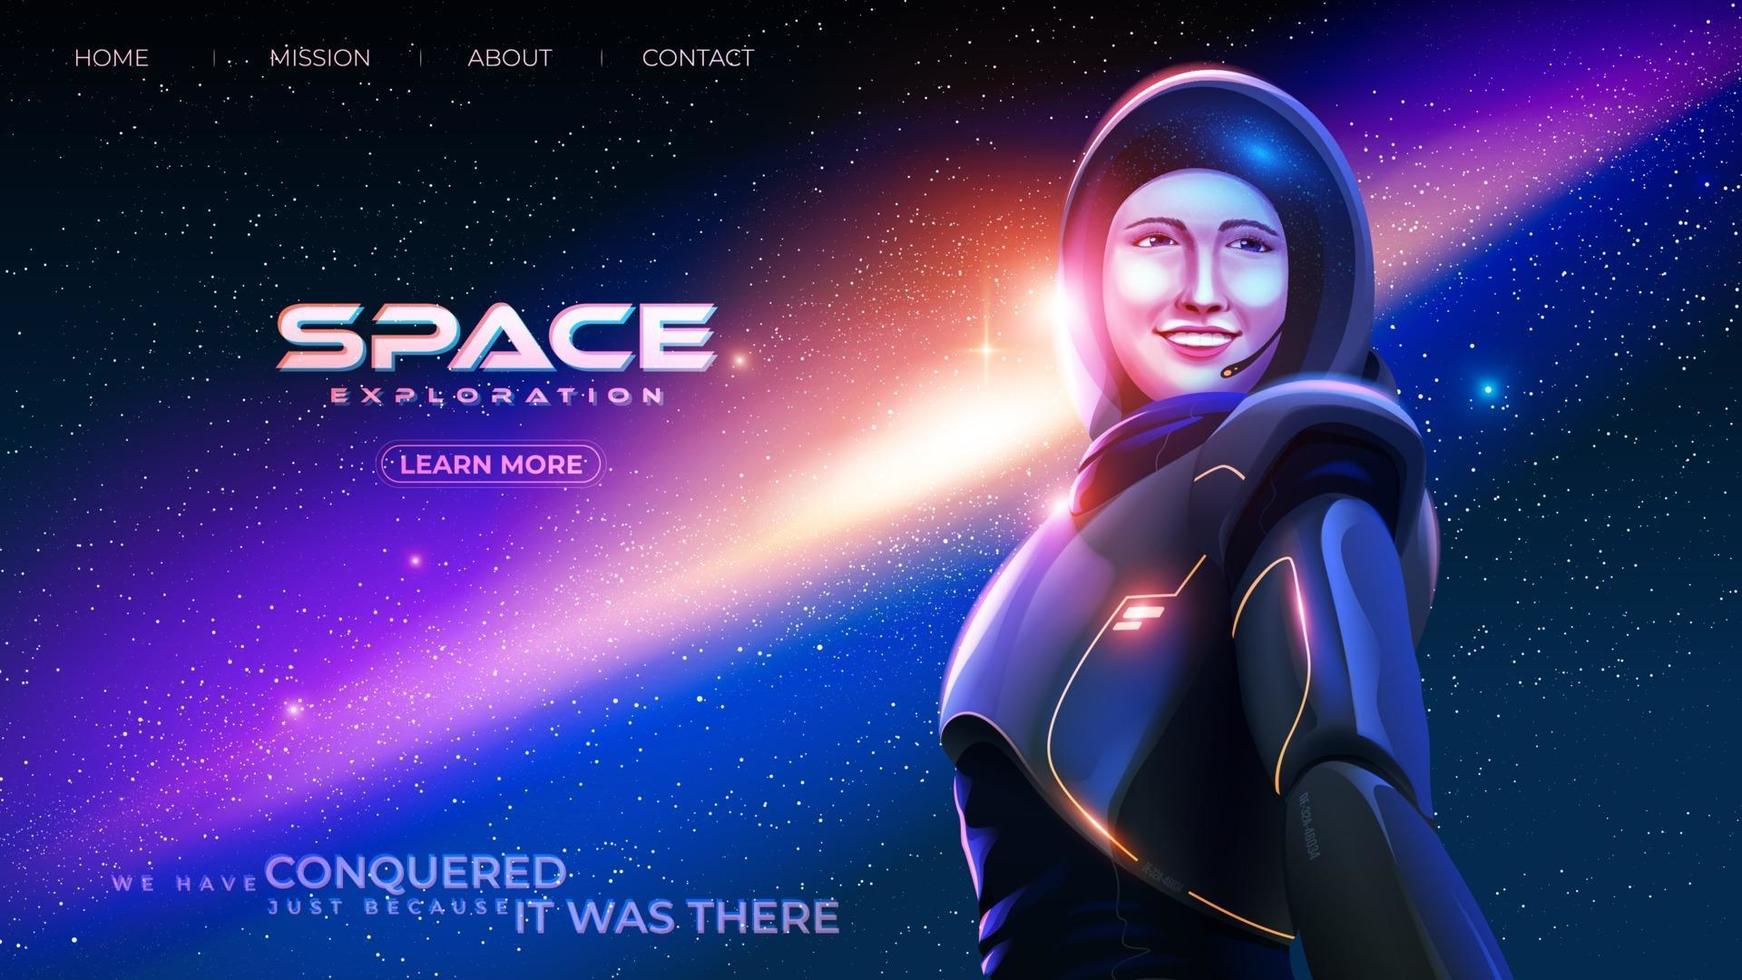 the lady astronaut in a spacesuit is smiling with happiness with the background of the massive universe vector